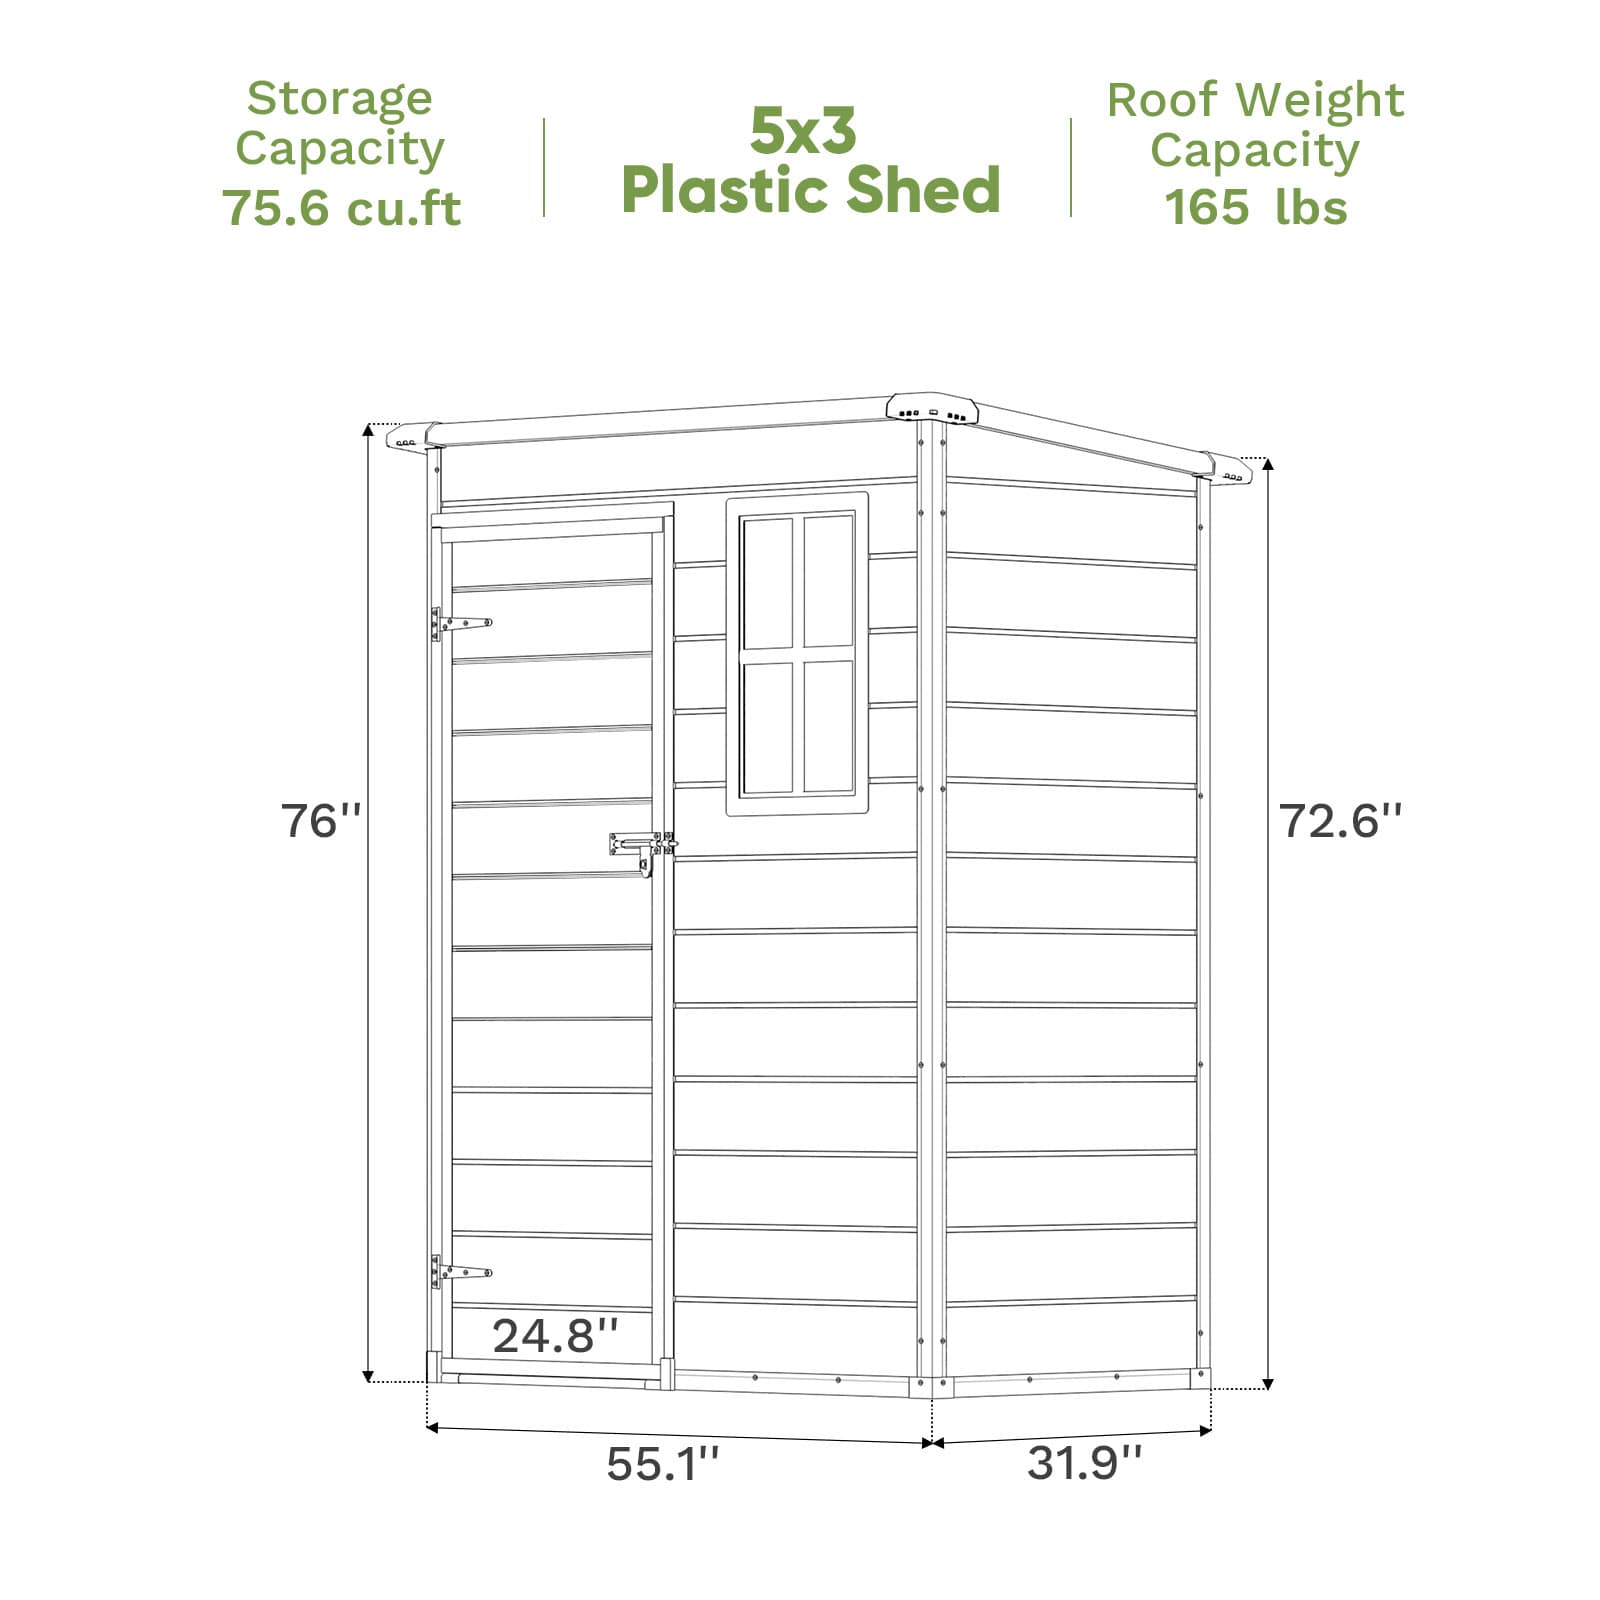 Patiowell 5x3 Plastic Shed-Dimensions